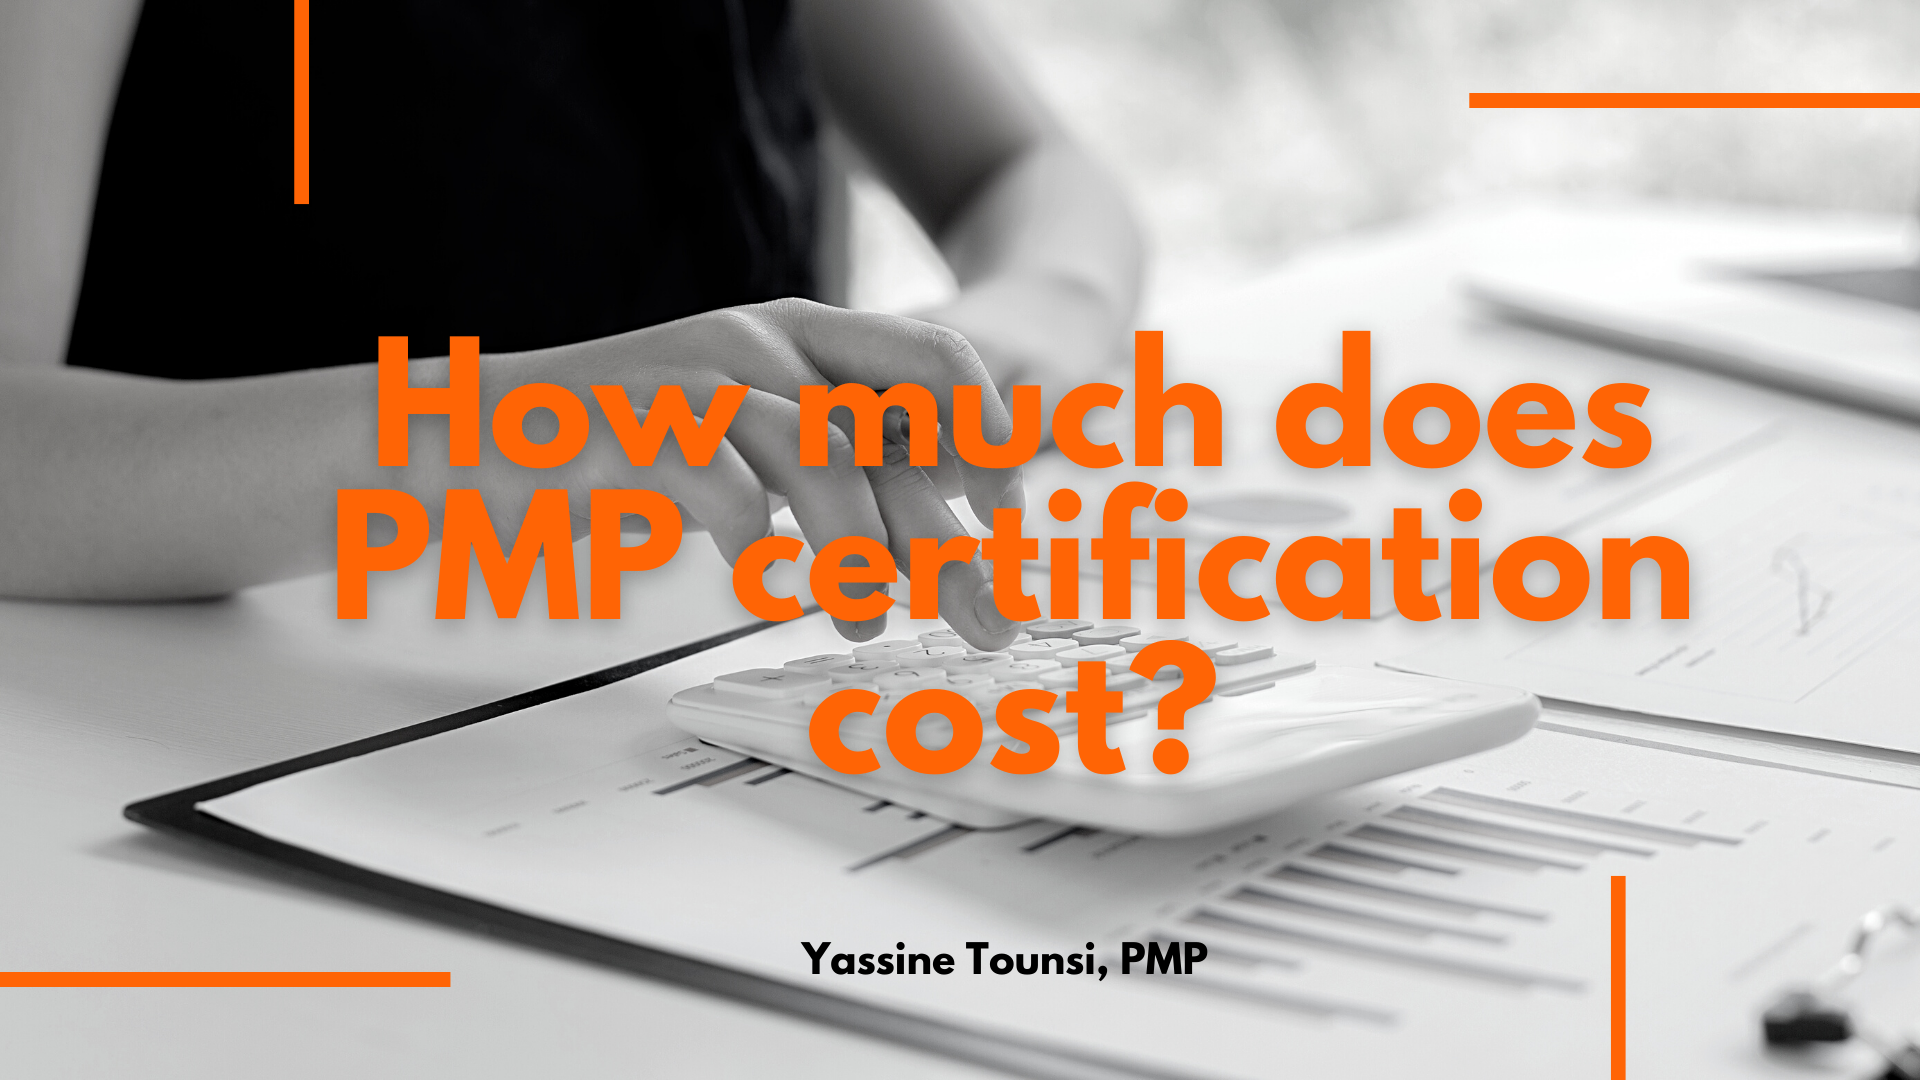 How much does PMP certification cost?